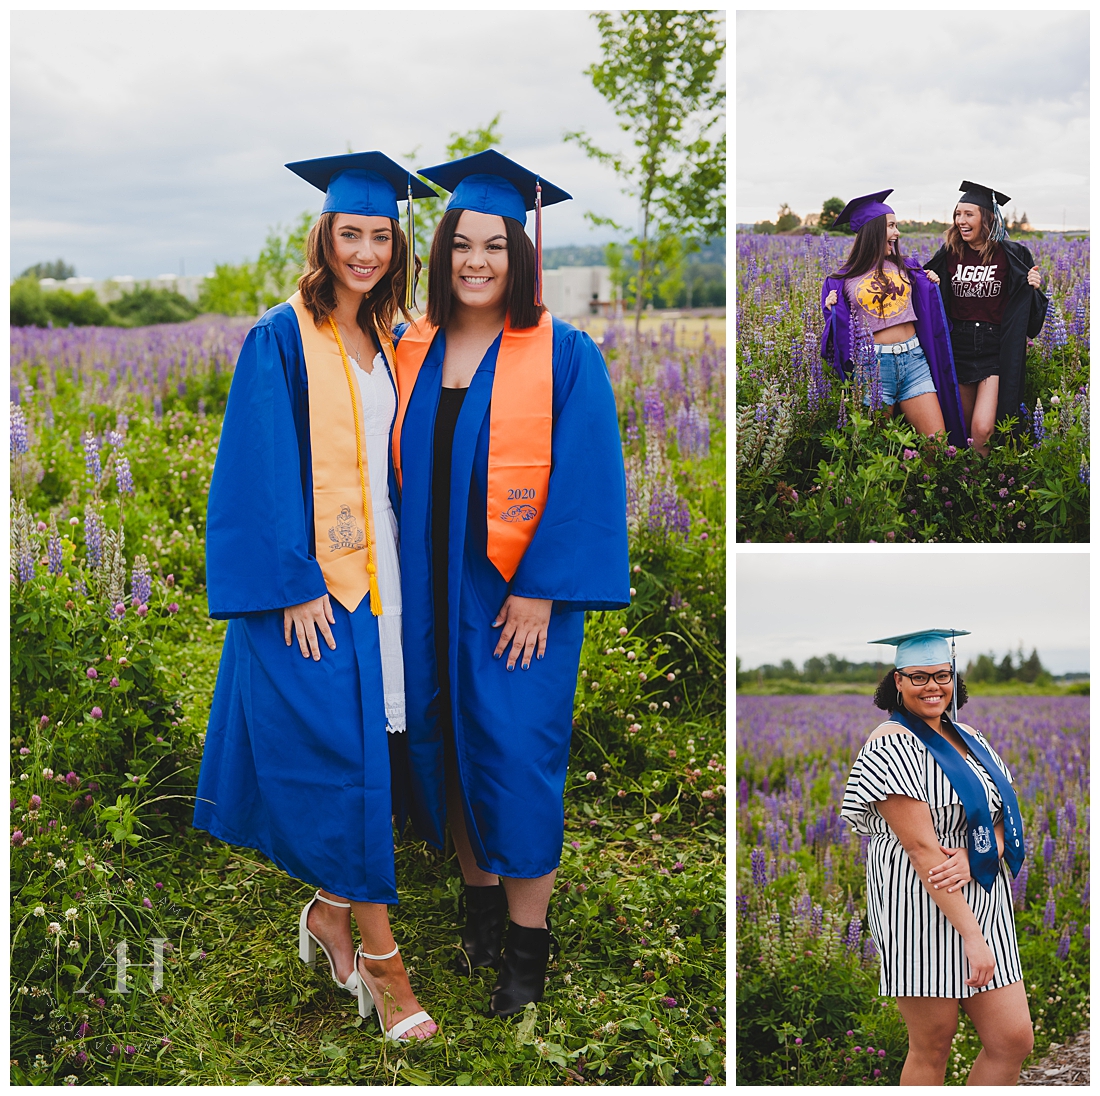 Outdoor Cap and Gown Portraits | Bring Your Best Friend to Your Cap and Gown Session with AHP | Photographed by the Best Tacoma Senior Portrait Photographer Amanda Howse